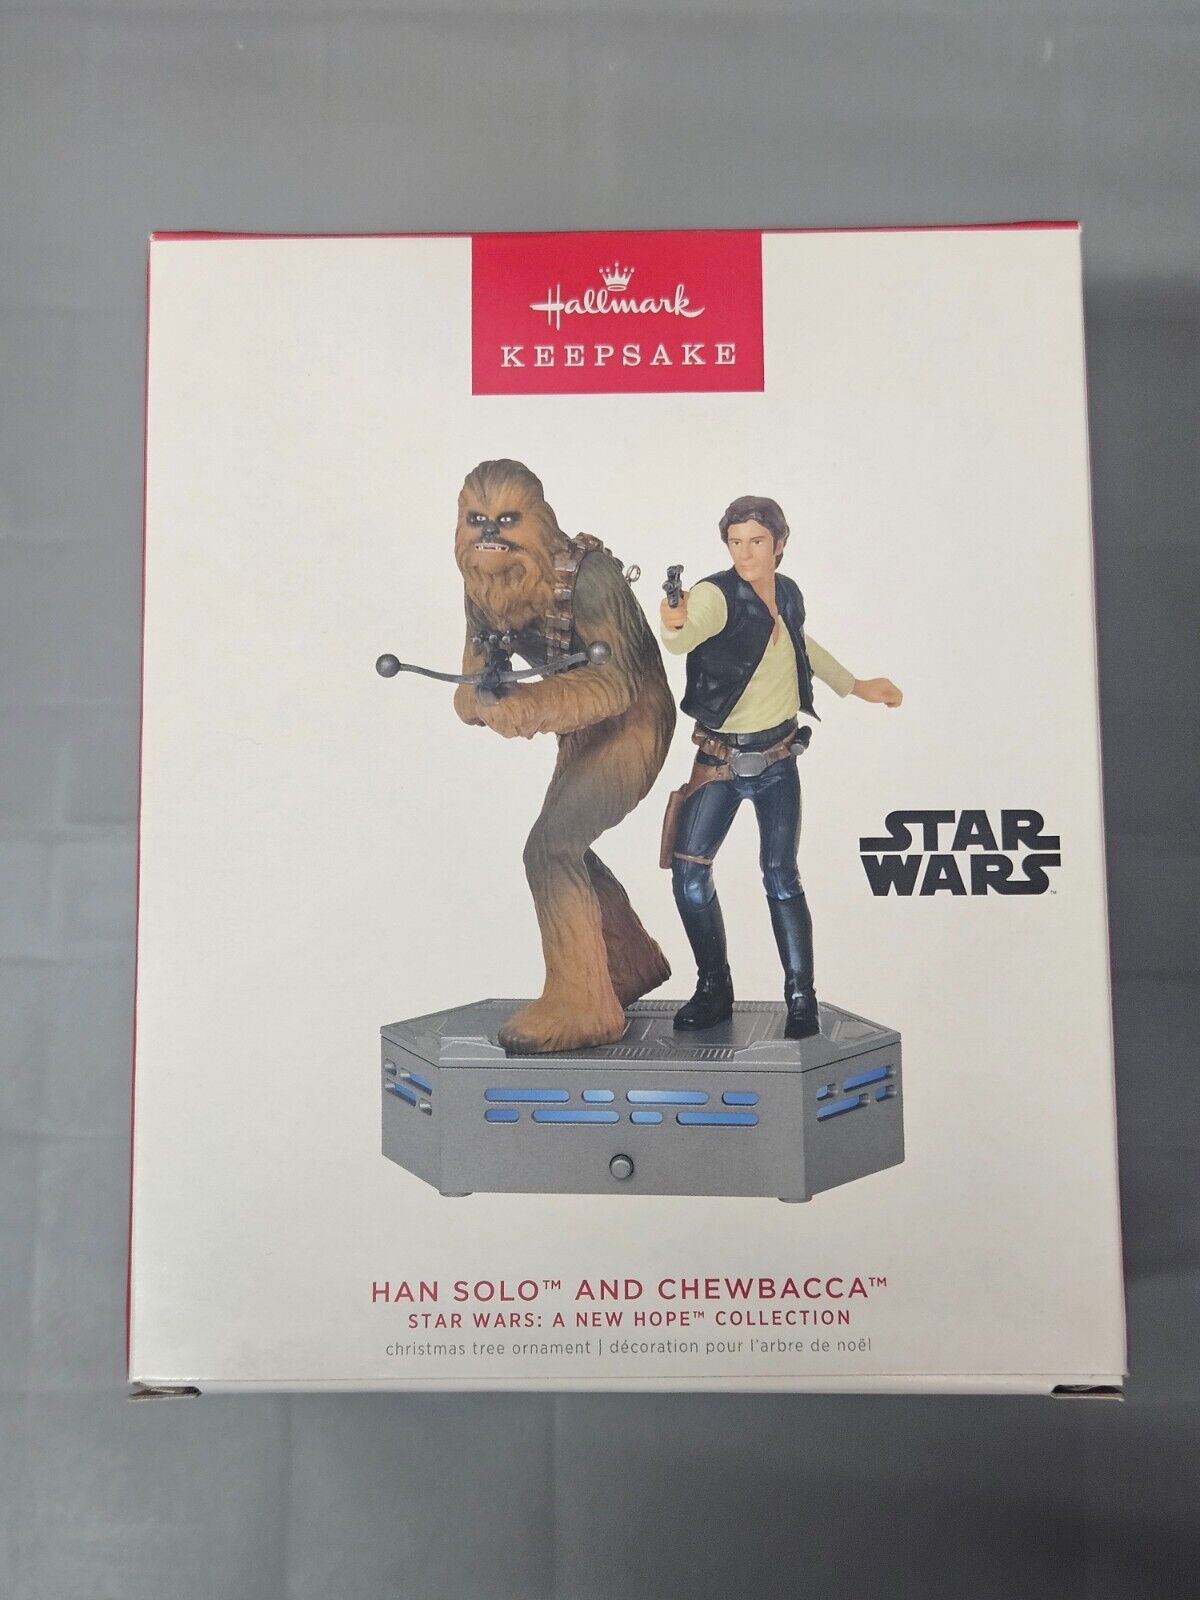 2022 Hallmark Star Wars Storyteller Han Solo and Chewbacca A New Hope Ornament 